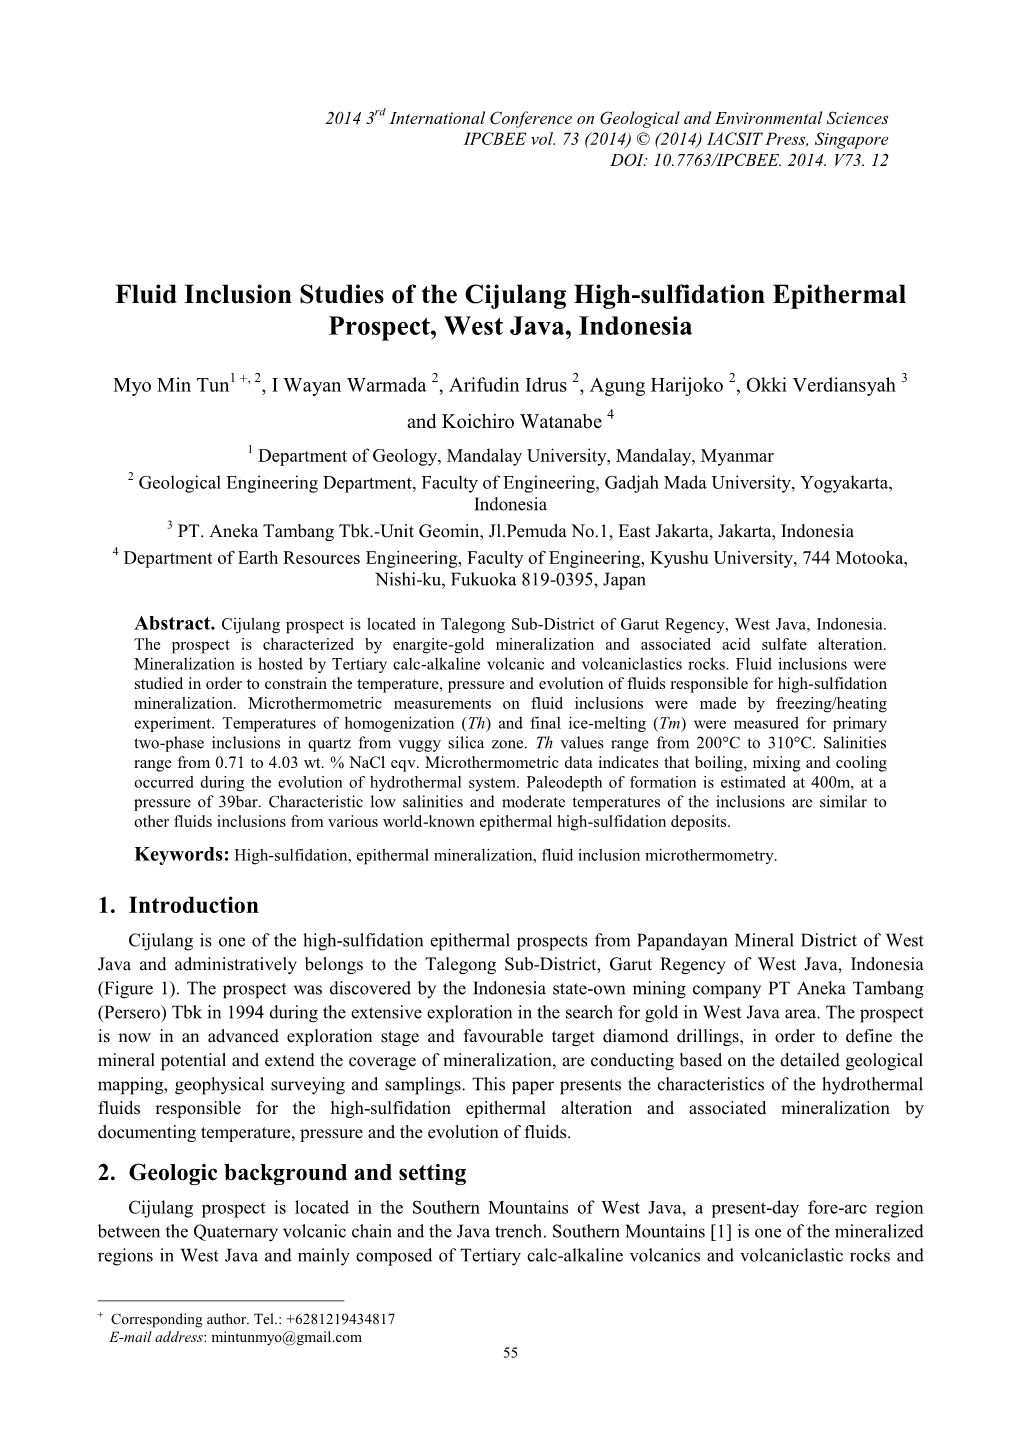 Fluid Inclusion Studies of the Cijulang High-Sulfidation Epithermal Prospect, West Java, Indonesia